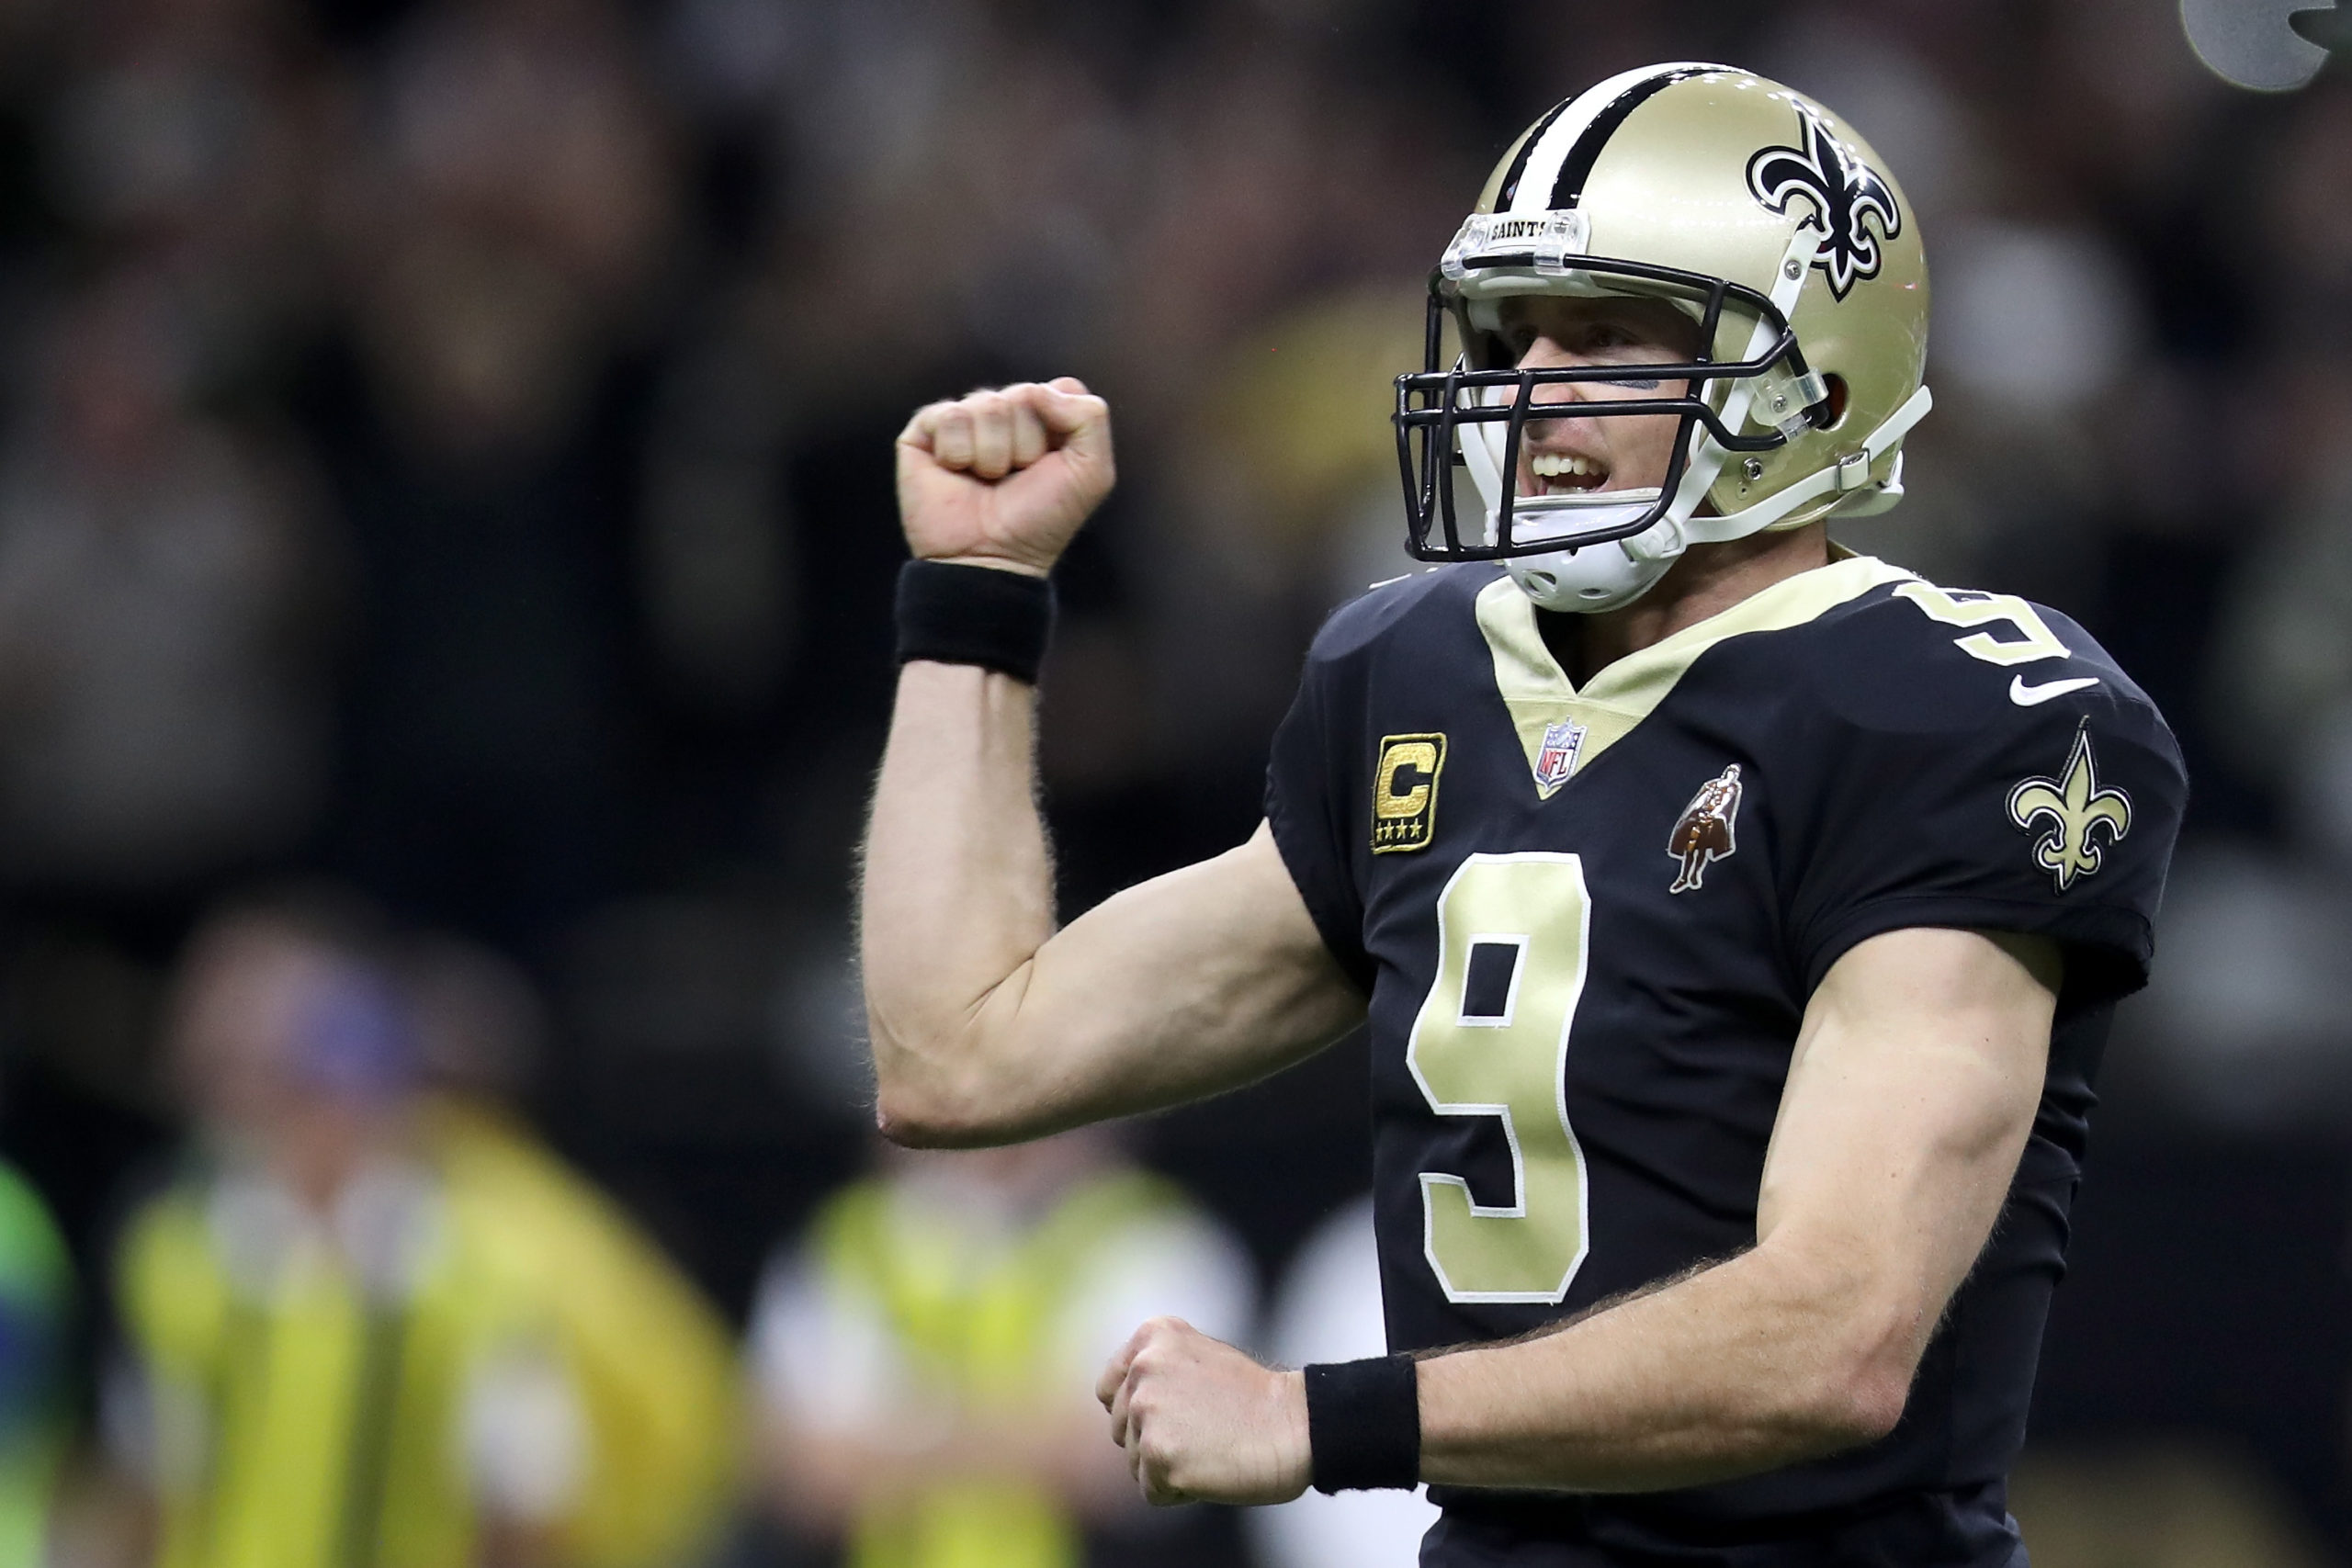 NEW ORLEANS, LA - JANUARY 07:  Drew Brees #9 of the New Orleans Saints reacts after throwing a touchdown pass against the Carolina Panthers at the Mercedes-Benz Superdome on January 7, 2018 in New Orleans, Louisiana.  (Photo by Chris Graythen/Getty Images)